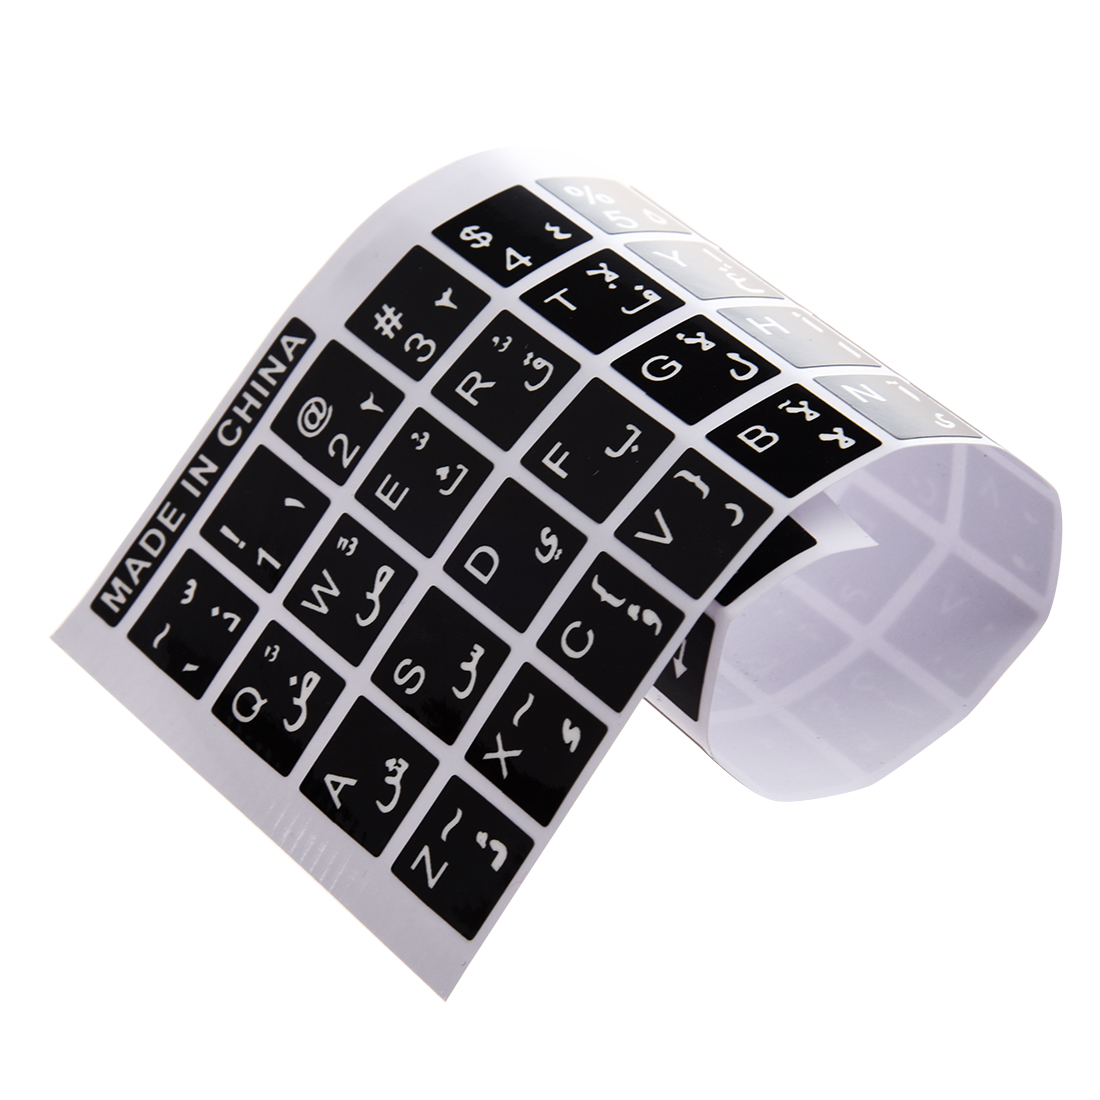 10 pcs/lot White Letters French Azerty Keyboard Sticker Cover